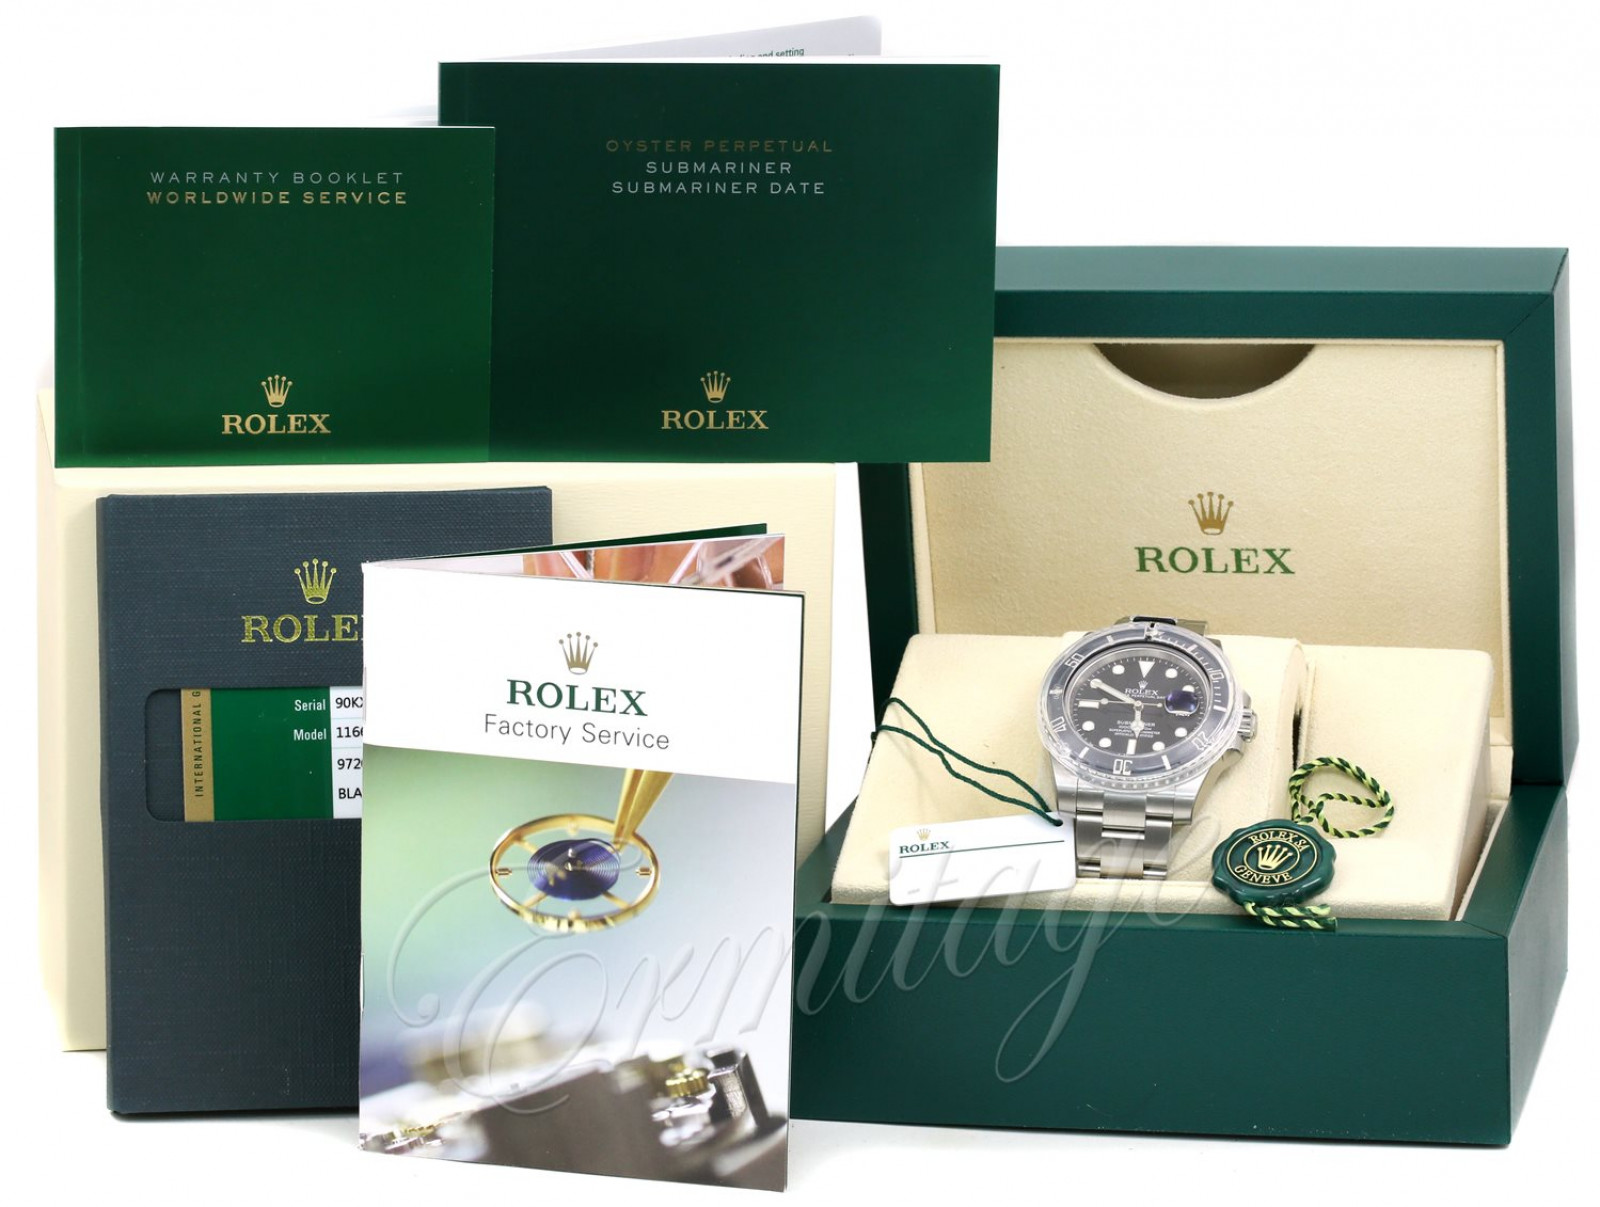 Pre-Owned Rolex Submariner 116610 Diving Watch